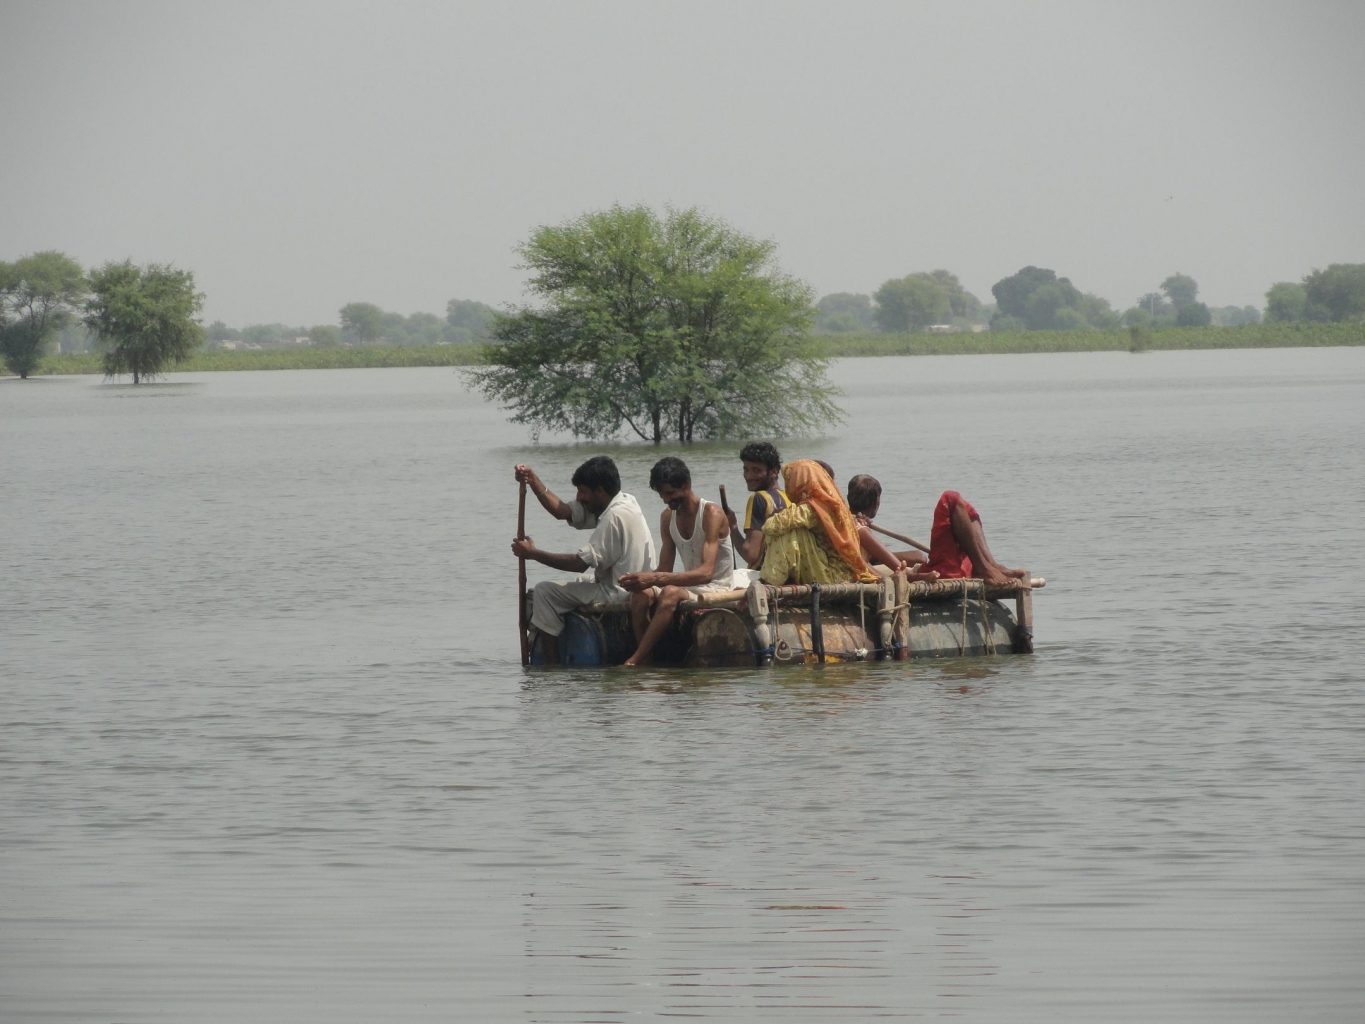 Keeping a promise: Caritas helps Pakistan’s latest flood victims